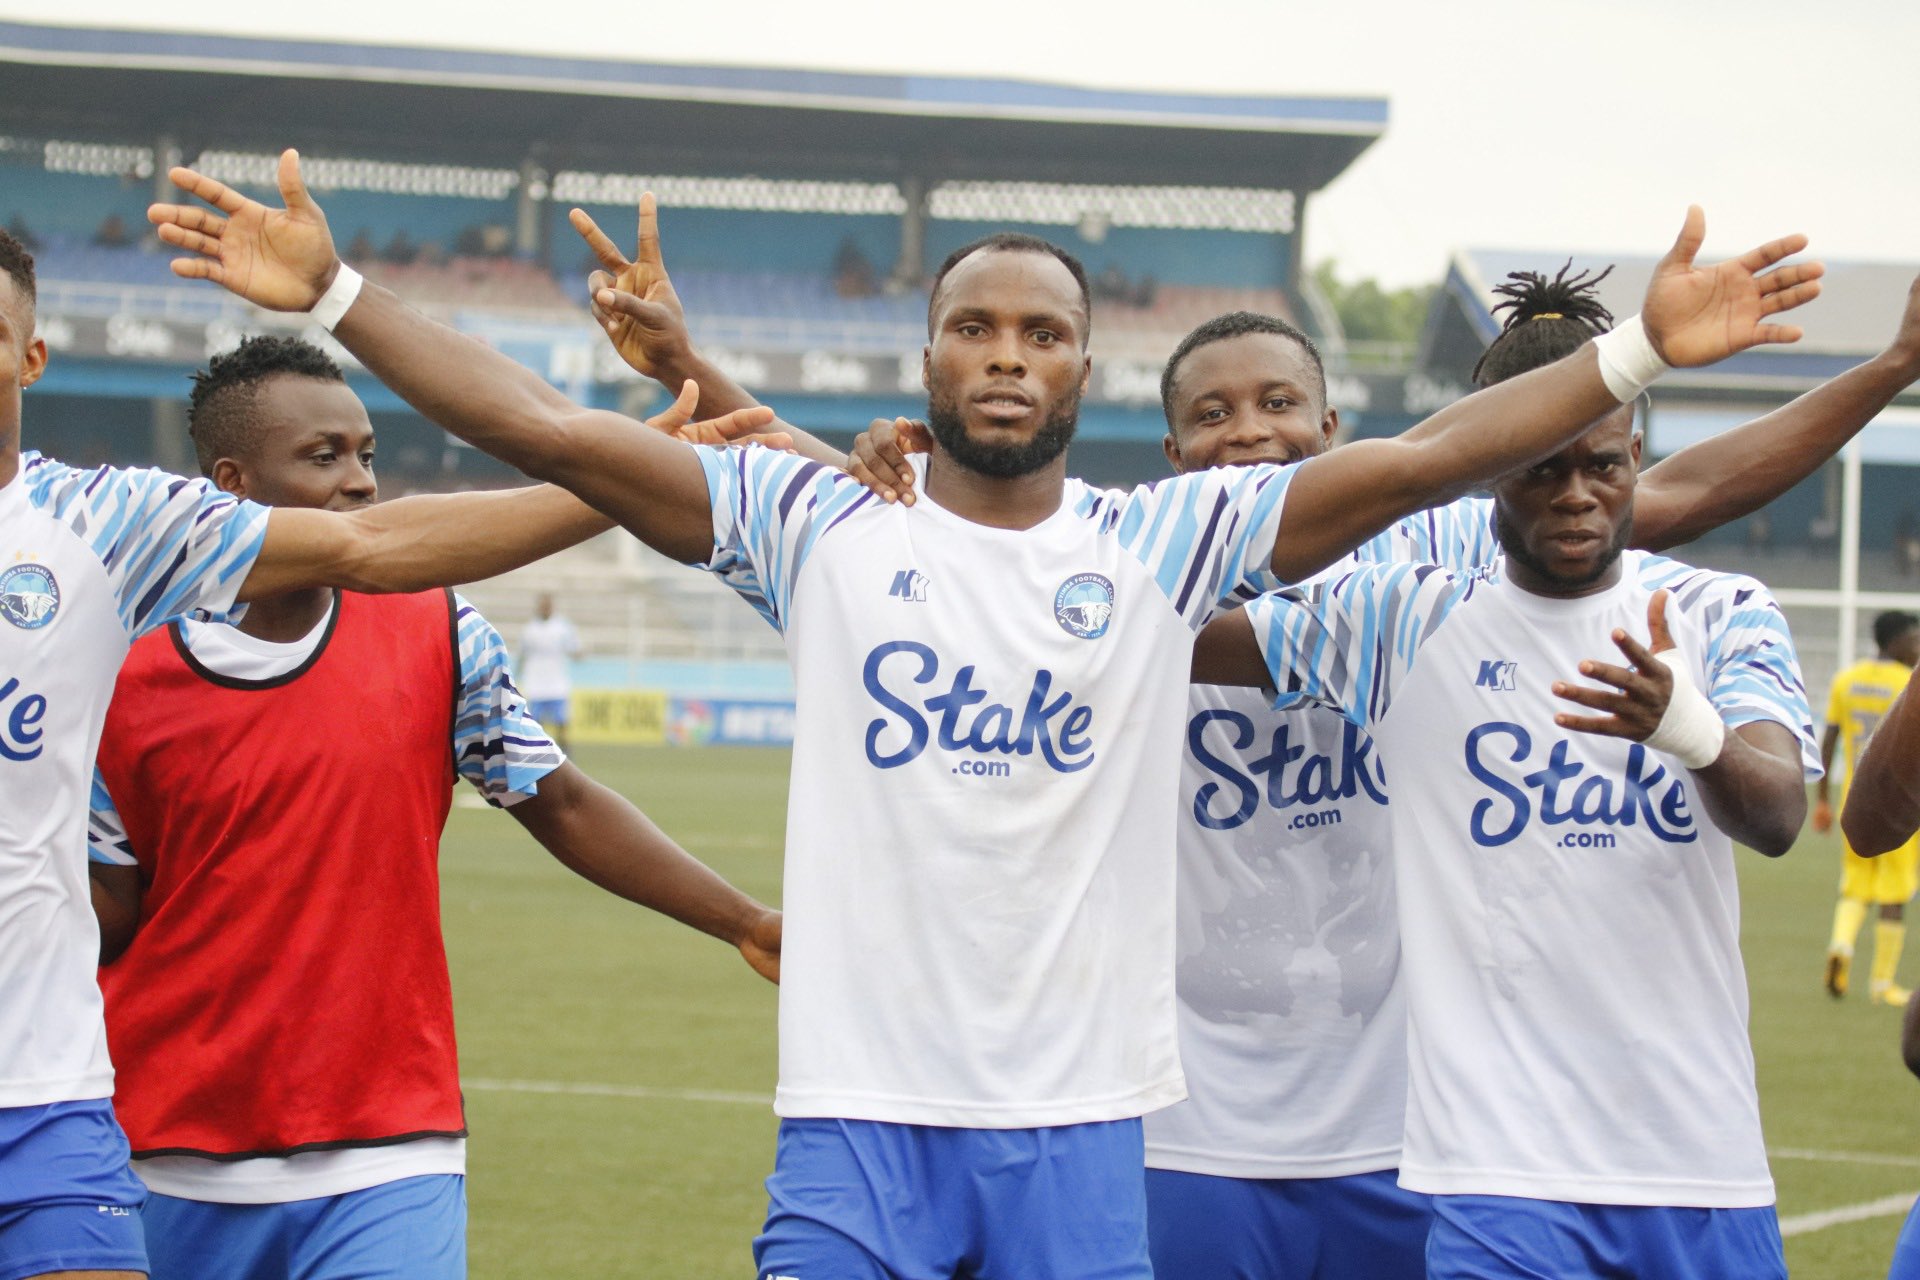 NPFL: Mbaoma scores late to give Enyimba all points against Doma United